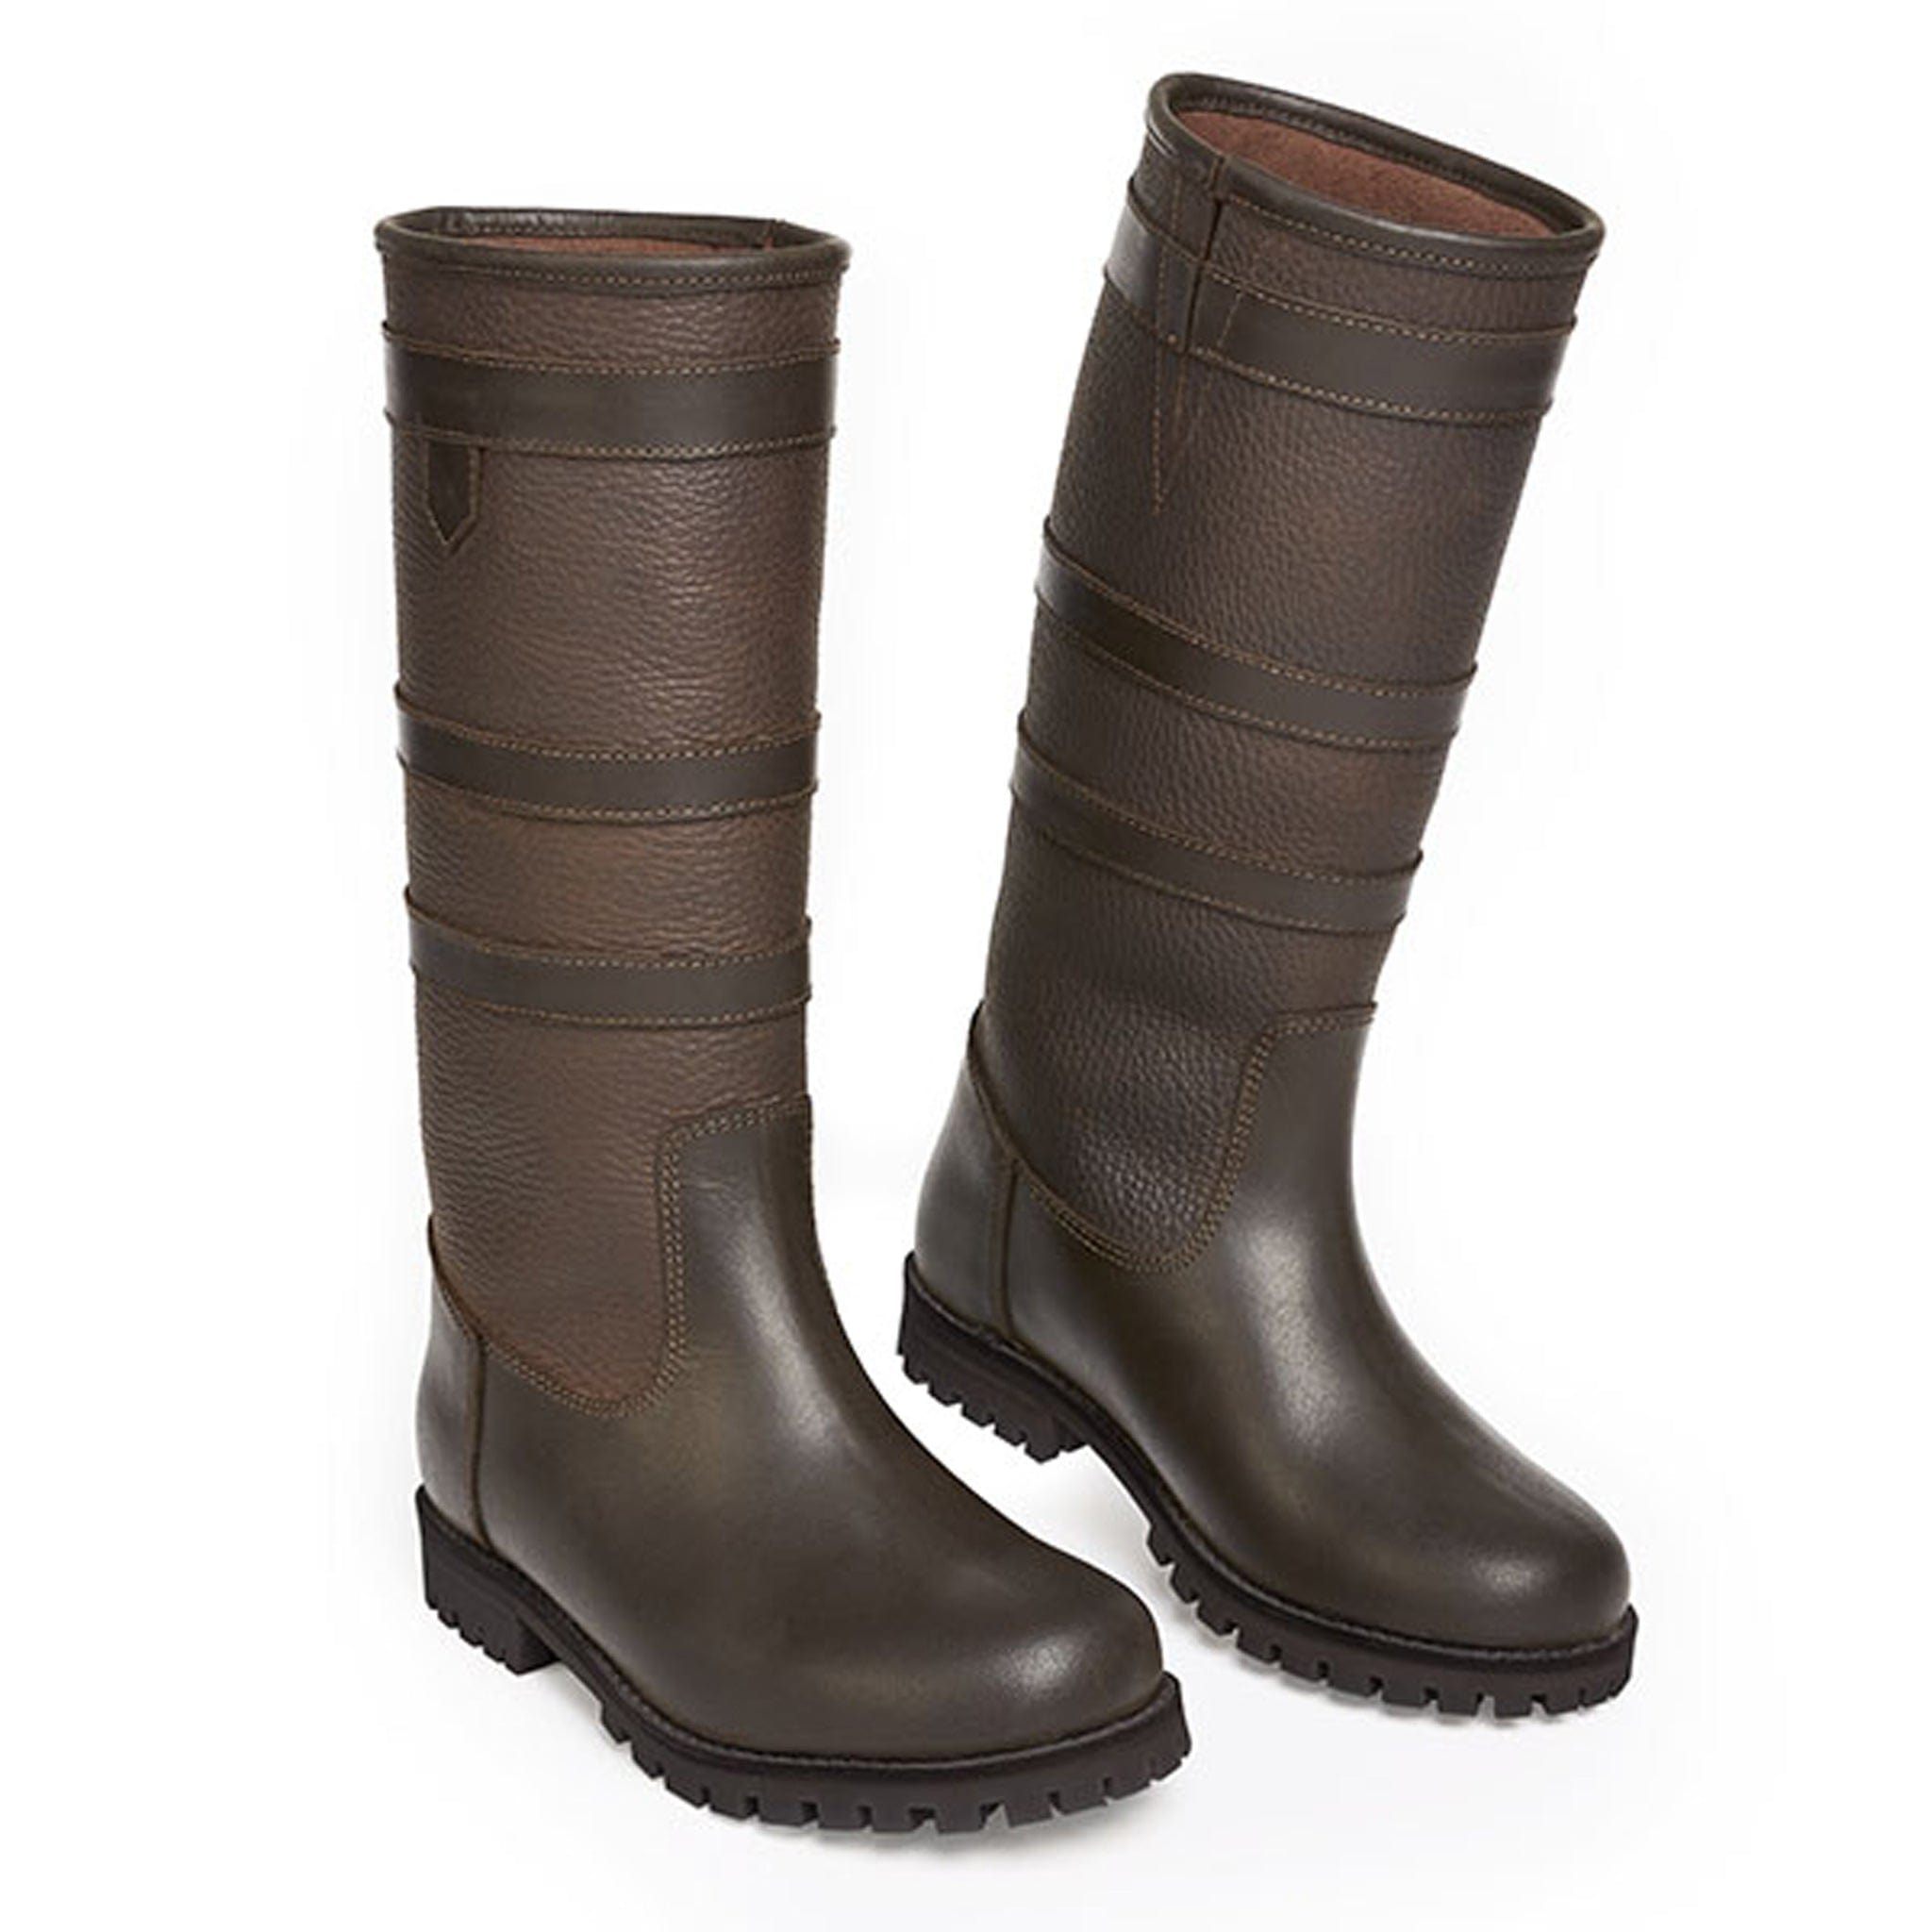 Elico Children's Whitby Country Boots